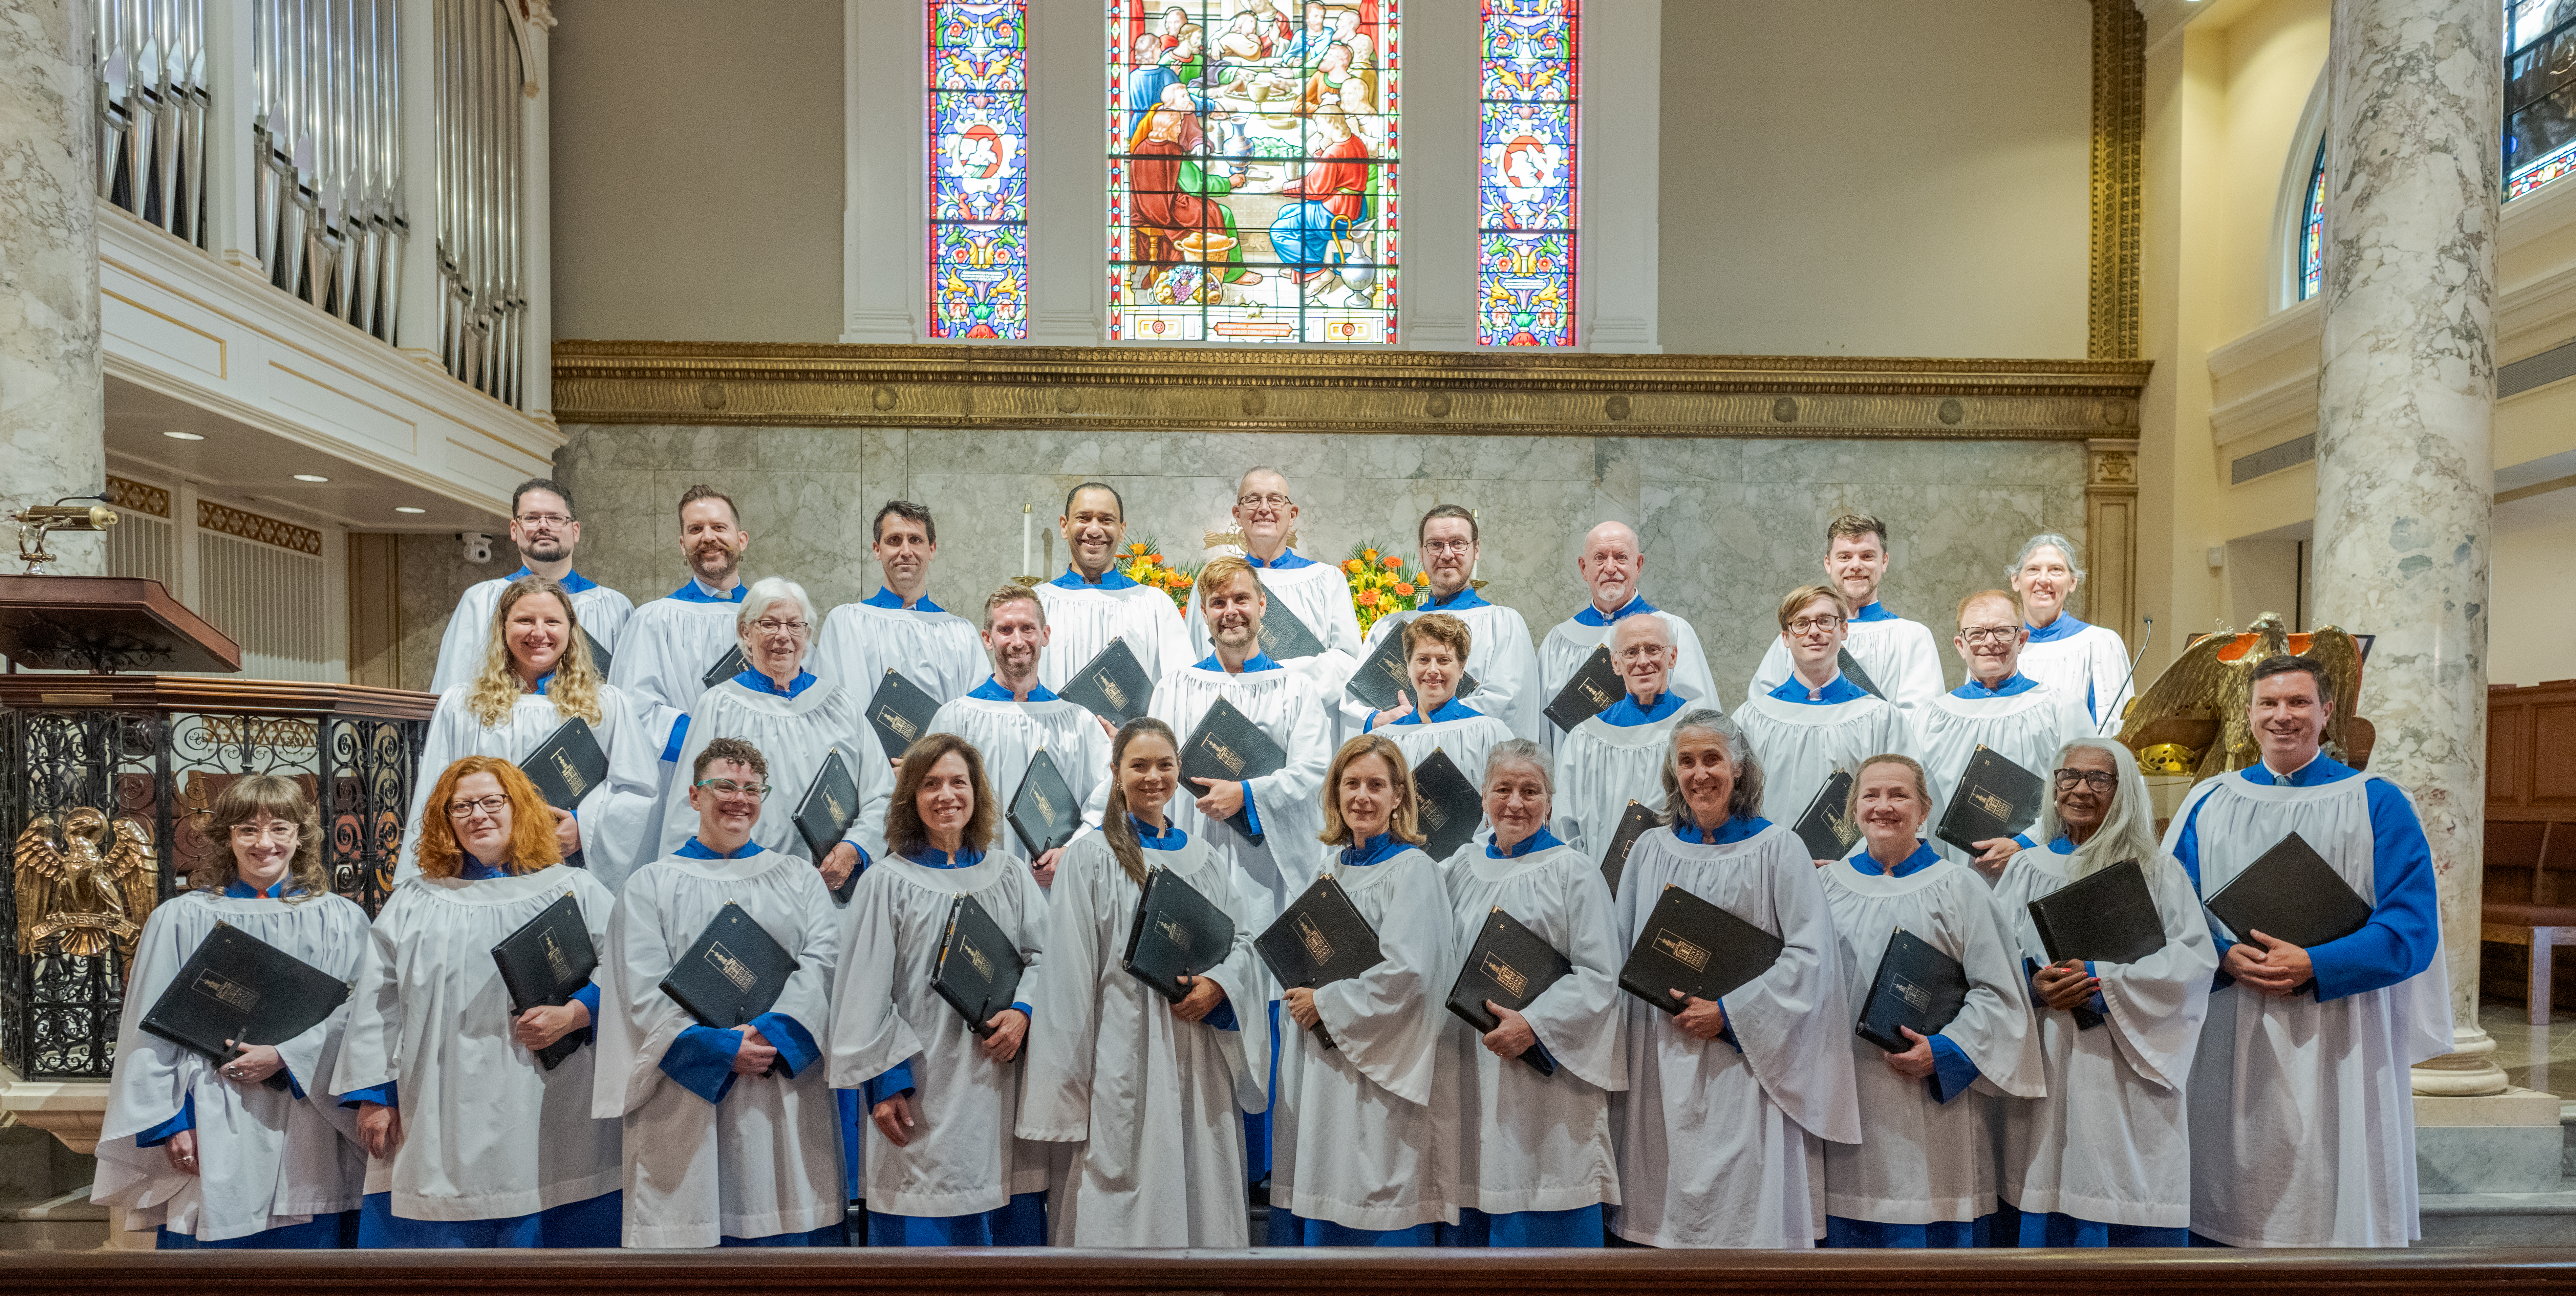 Formal group photo of the 27 adult members of the parish choir, along with the Director of Music Brent Erstad